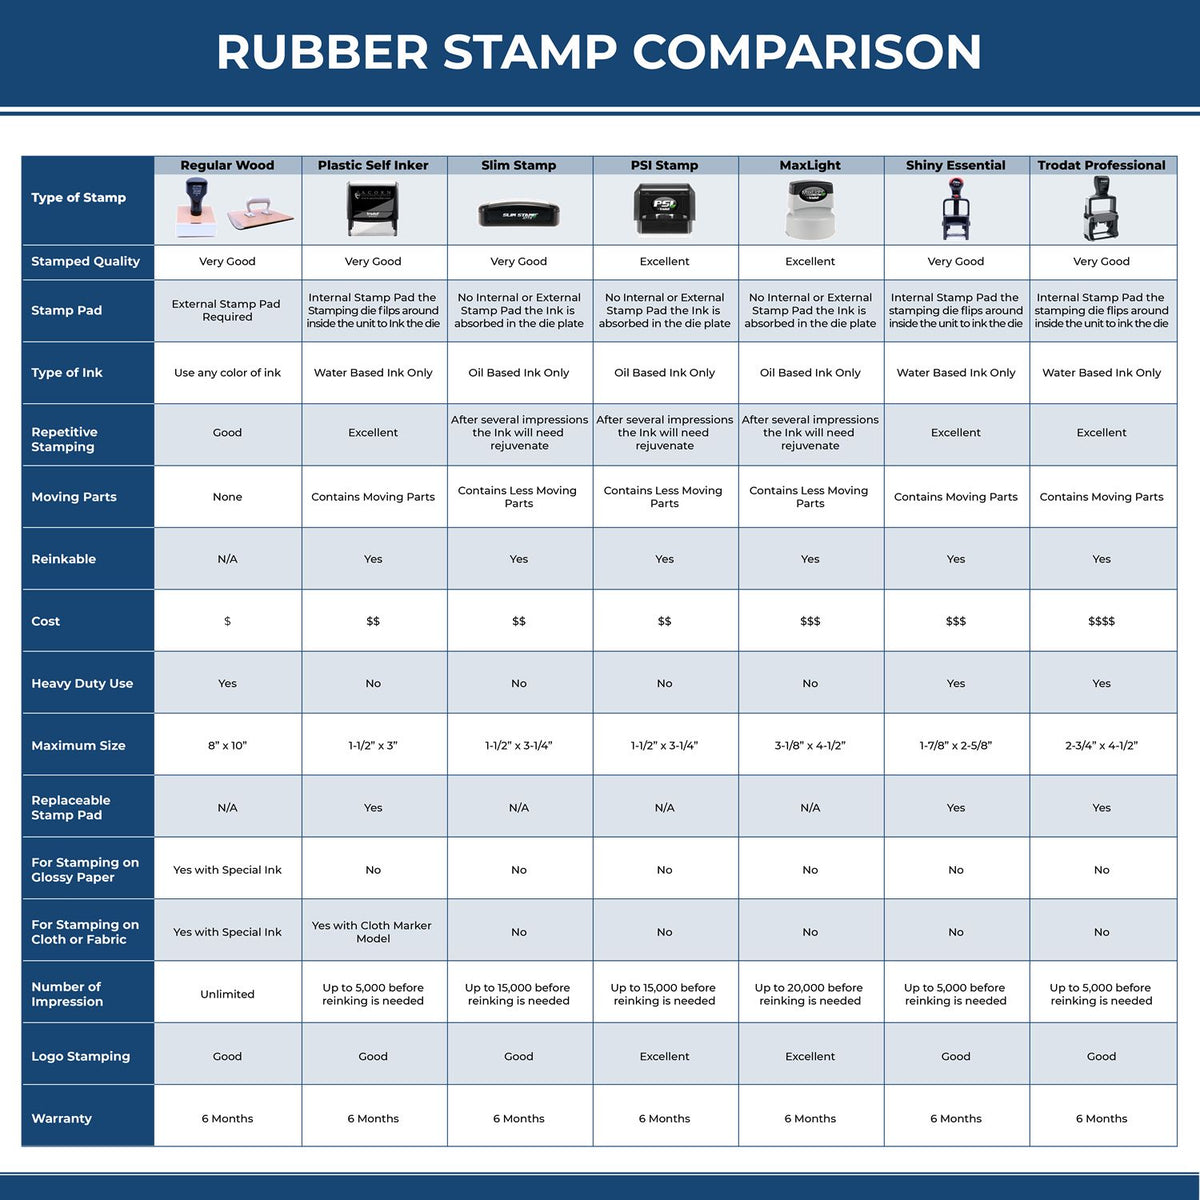 Large Self Inking Witness Stamp 4633S Rubber Stamp Comparison